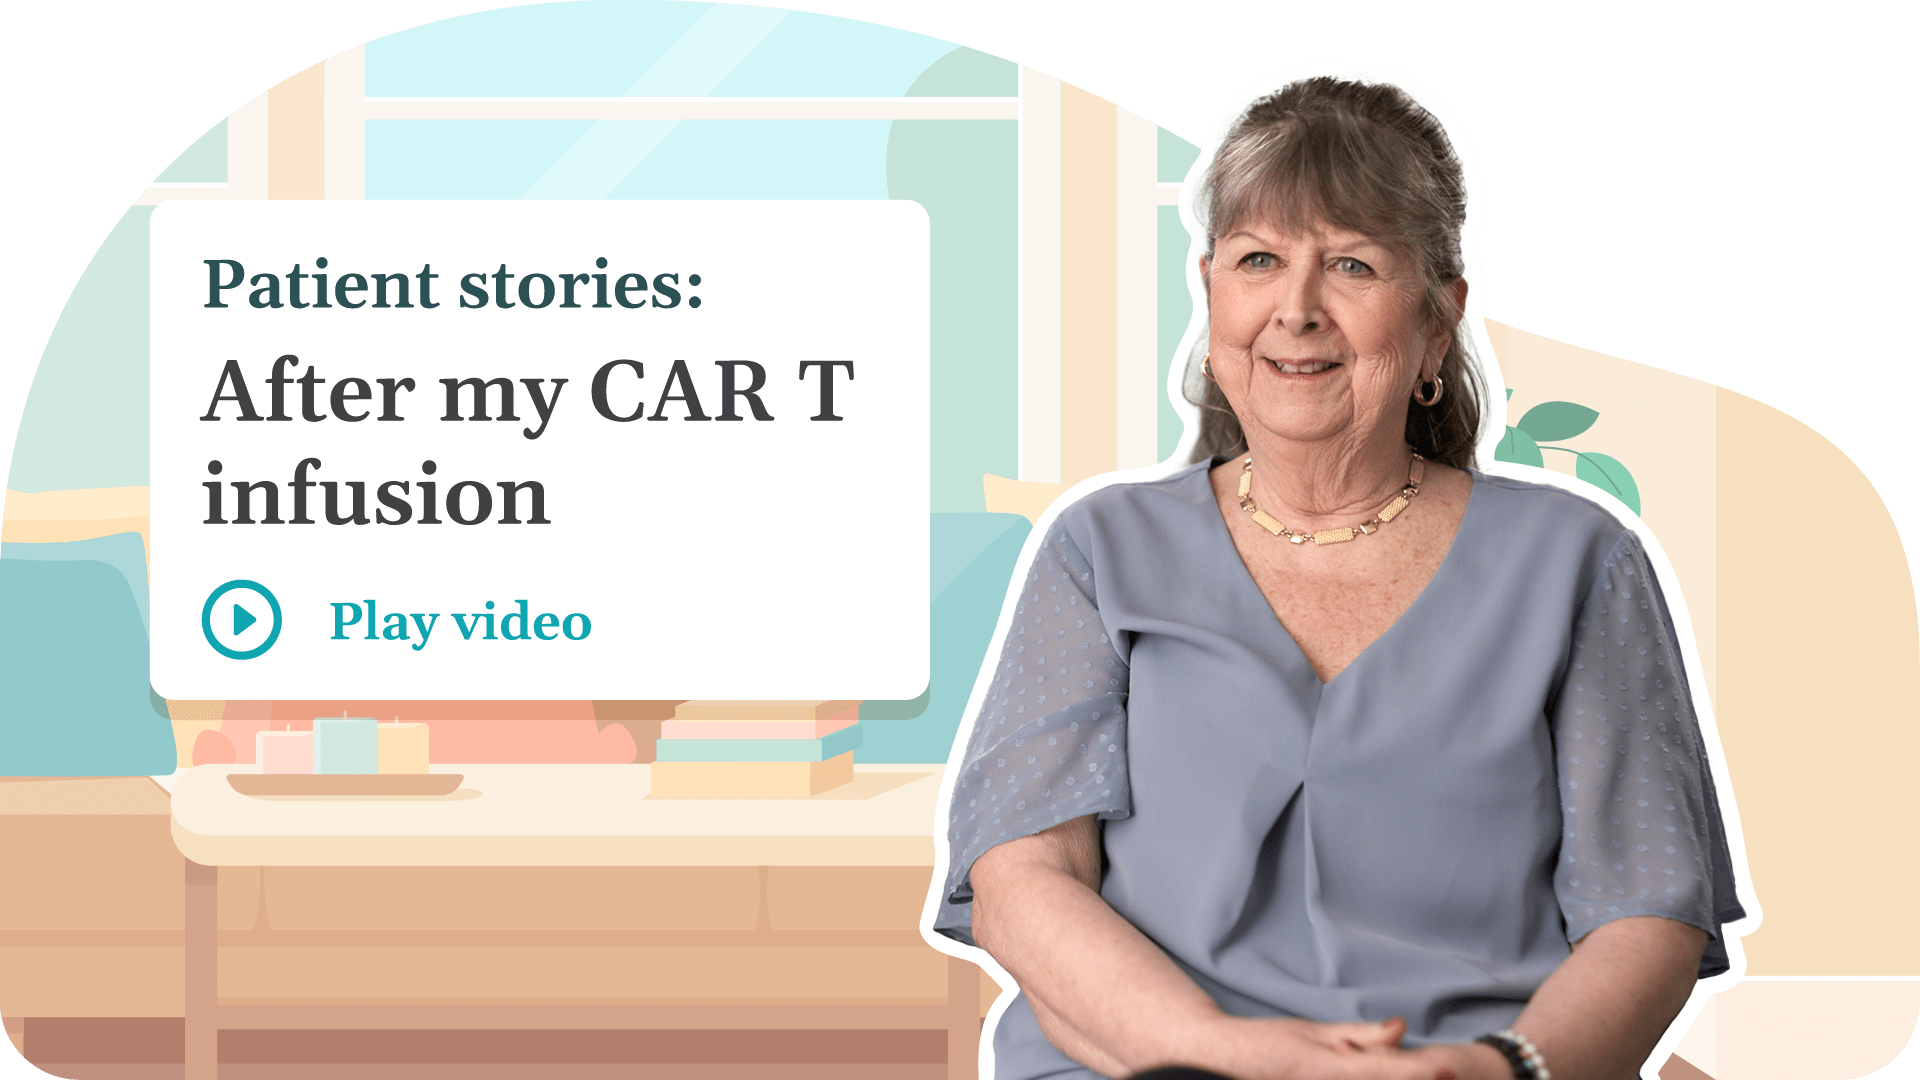 [Tap to play] Thumbnail for a video titled: Patient stories: After my CAR T infusion.